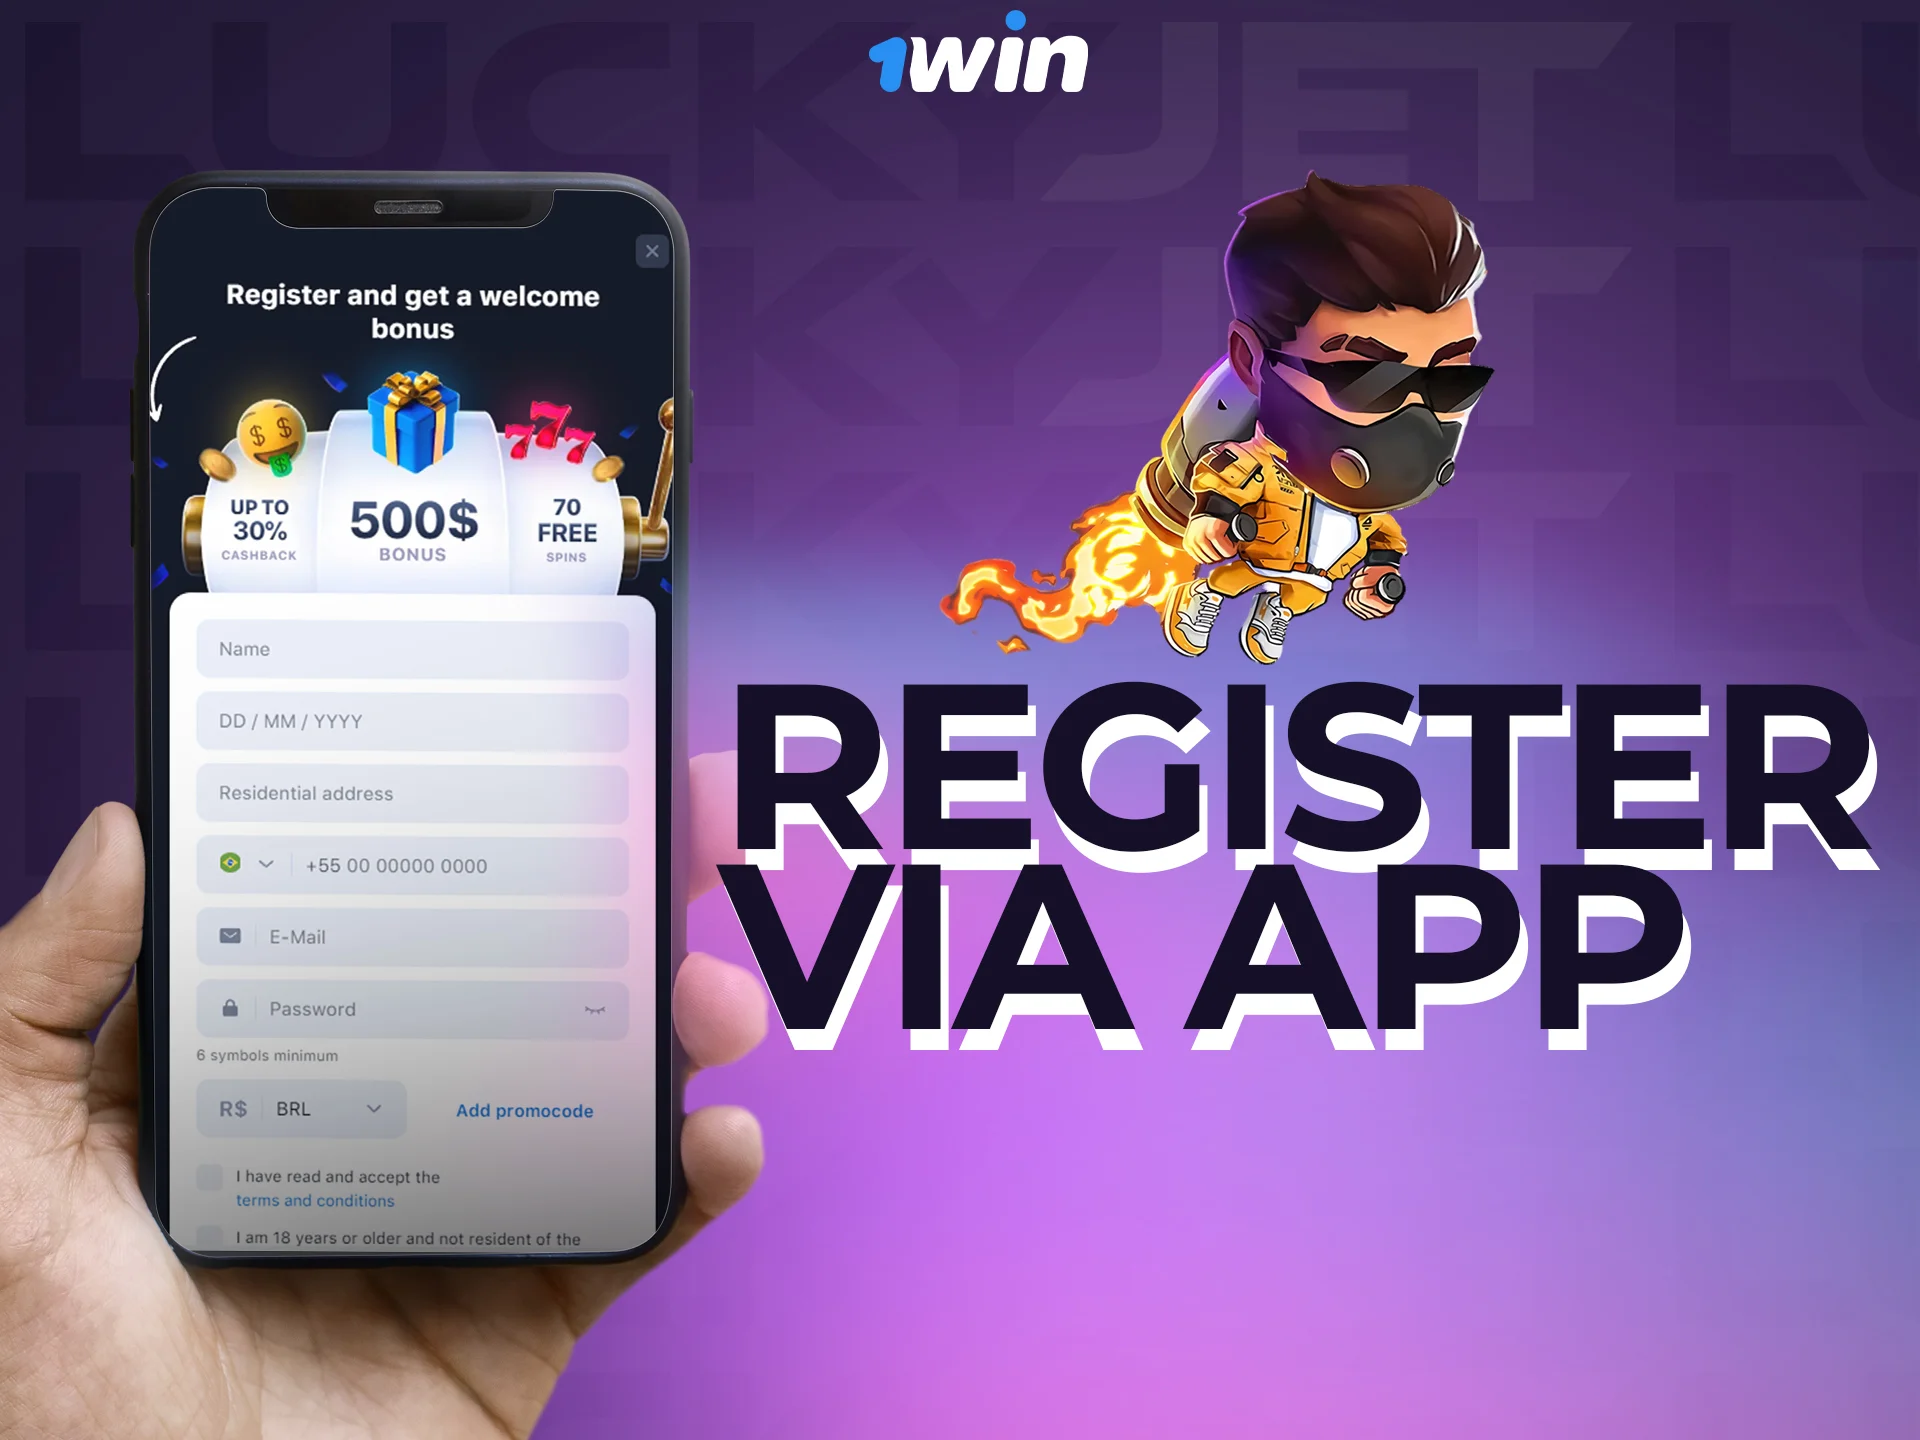 You can register at 1win through a mobile app.